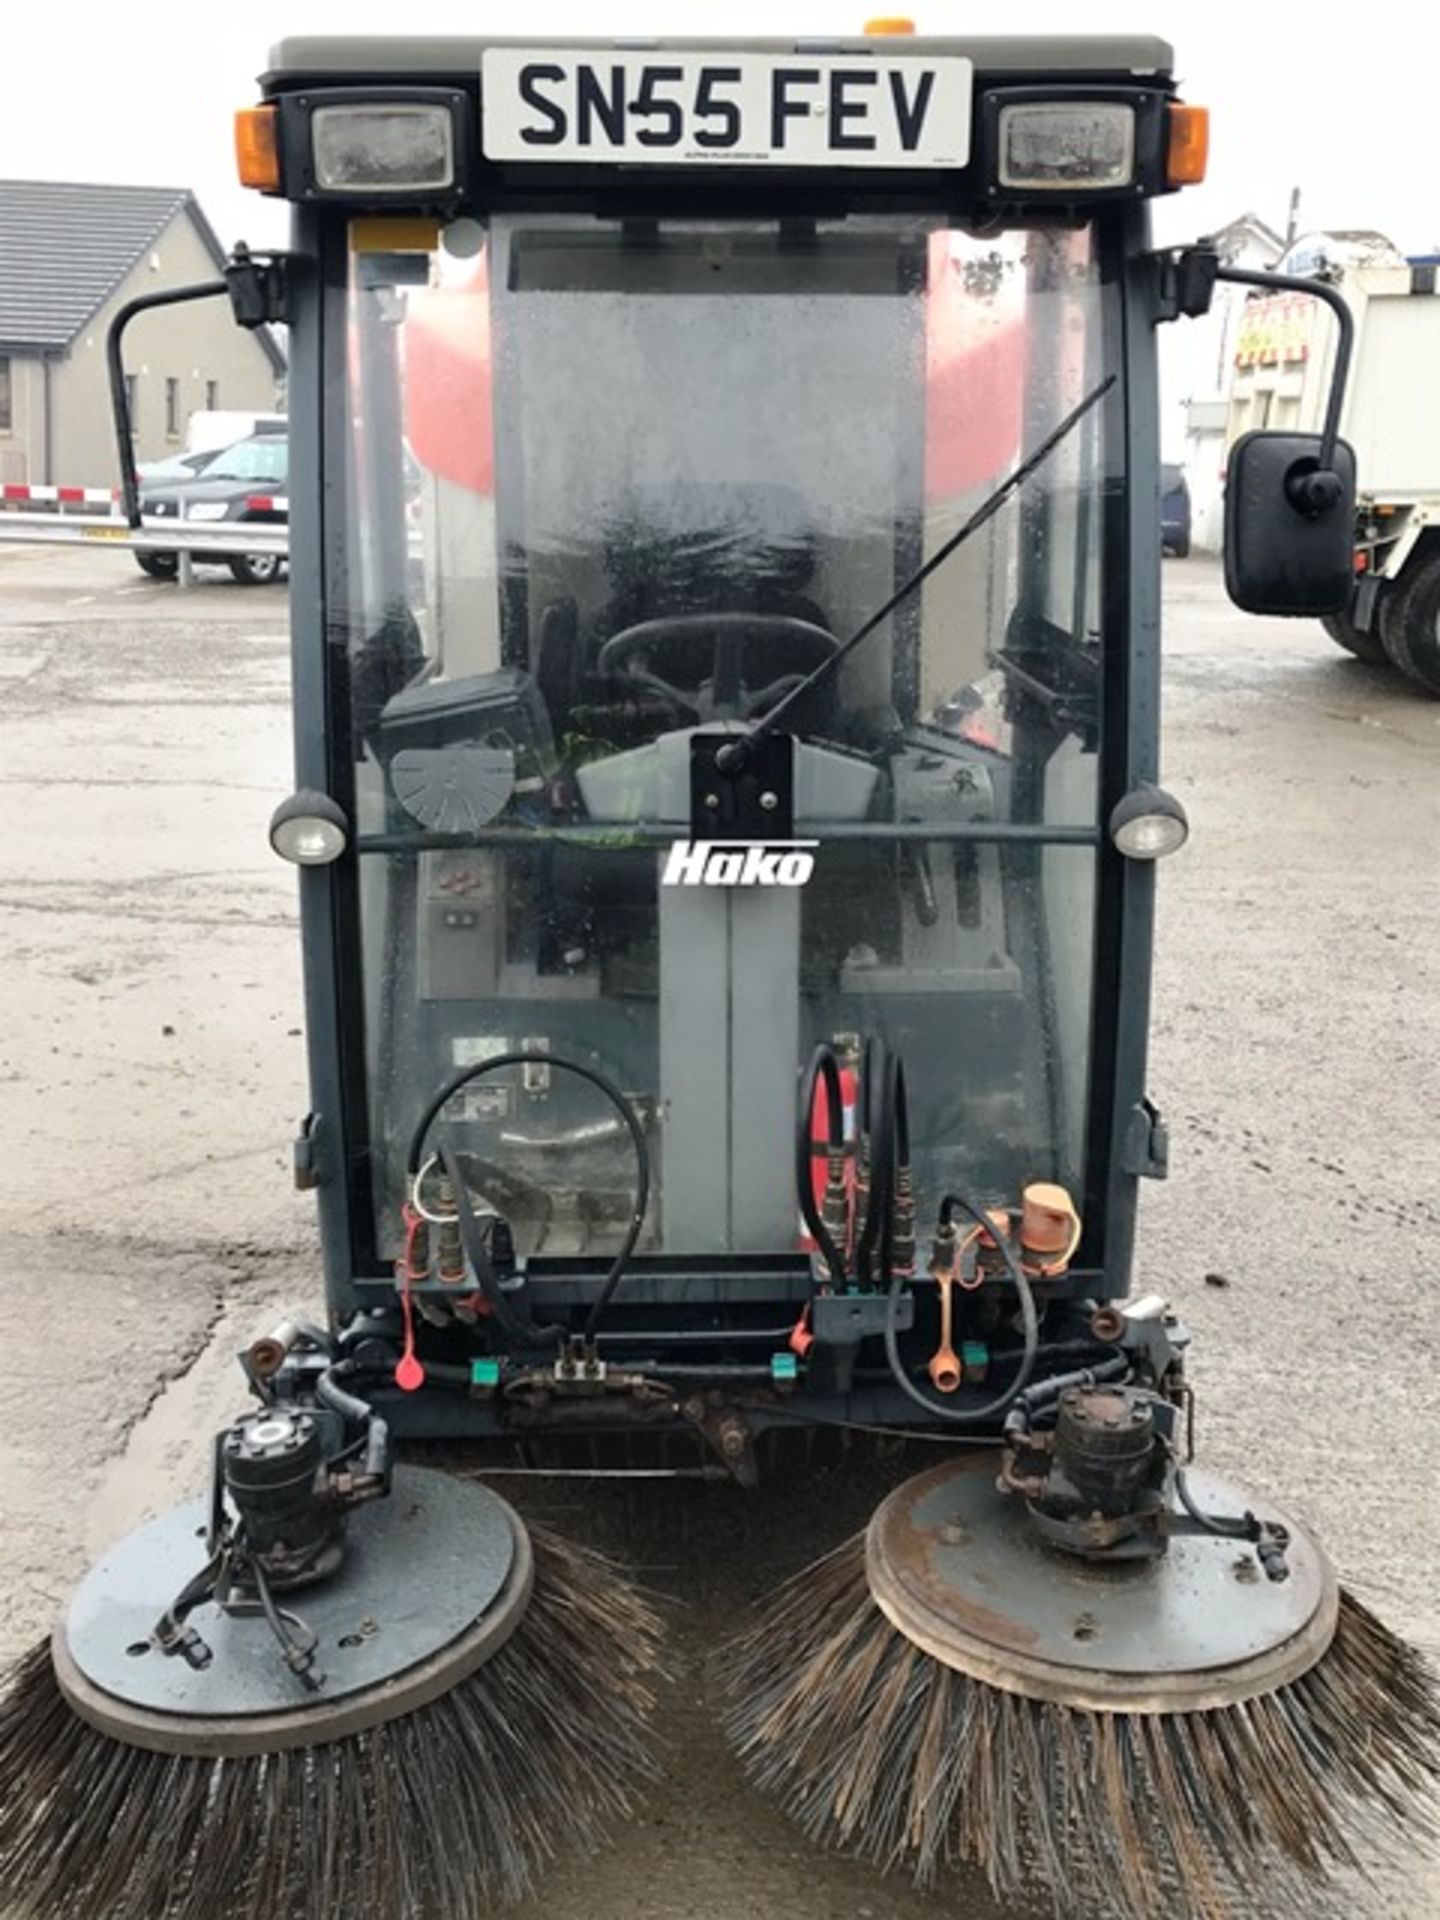 2005 HAKO SWEEPER, REG SN55FEV, S/N 143801500213, 130HRS (NOT VERIFIED), NEW ENGINE FITTED. - Image 2 of 5